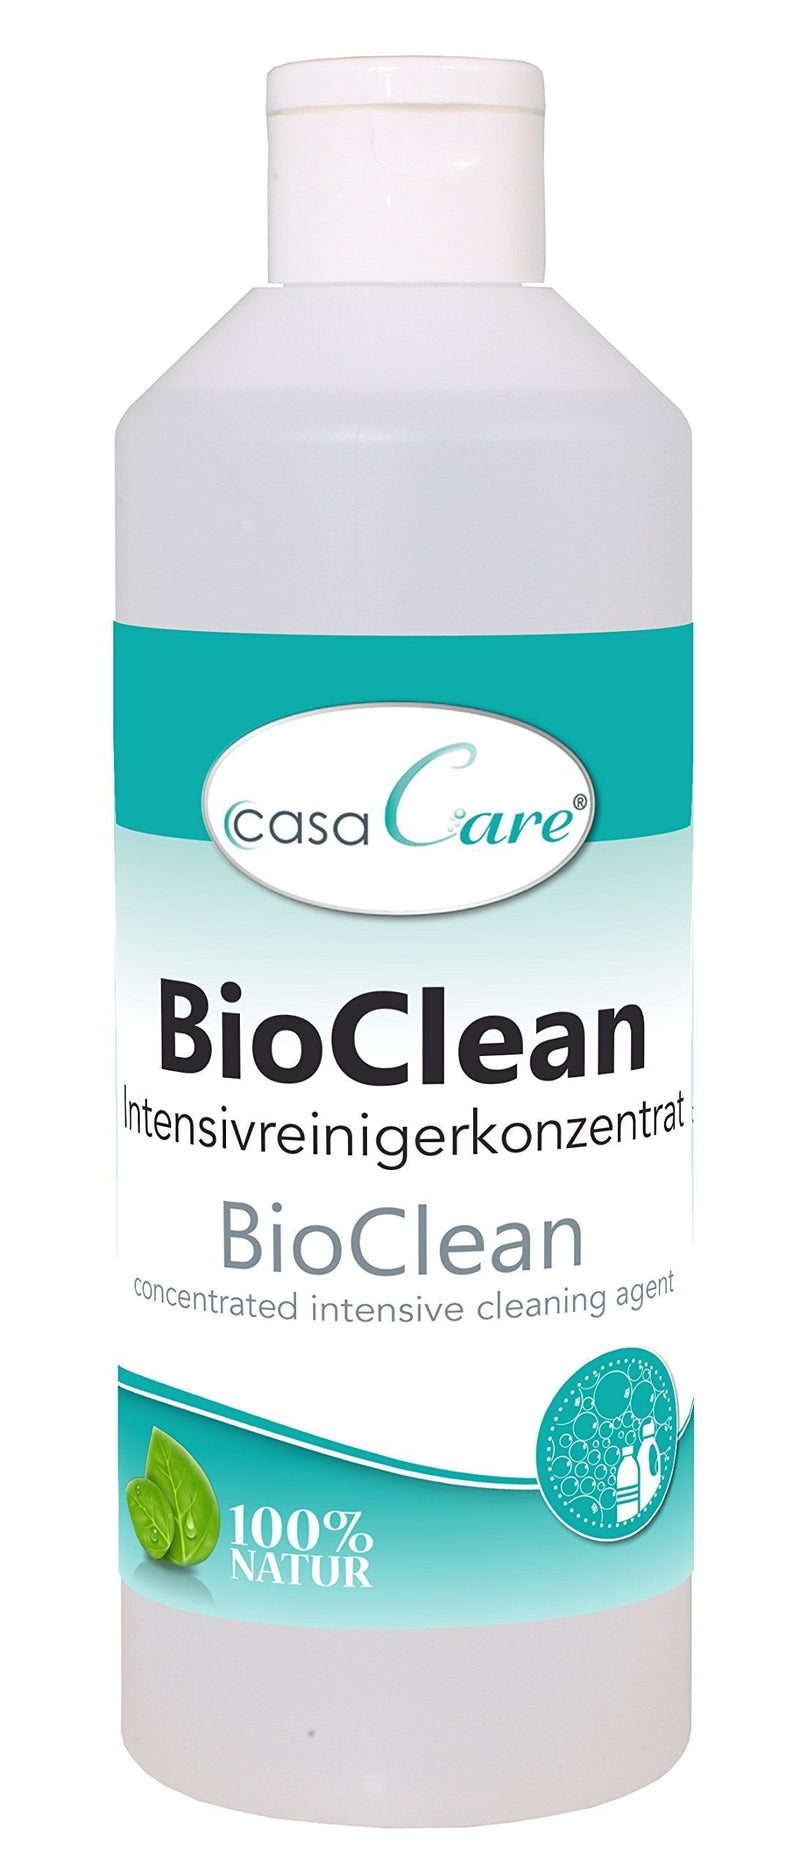 cdVet Naturprodukte casaCare BioClean Intensive Cleaner Concentrate 500 ml - cleaner - pollution - cleaning - thorough + environmentally friendly - usable on surfaces + car cleaning - - PawsPlanet Australia